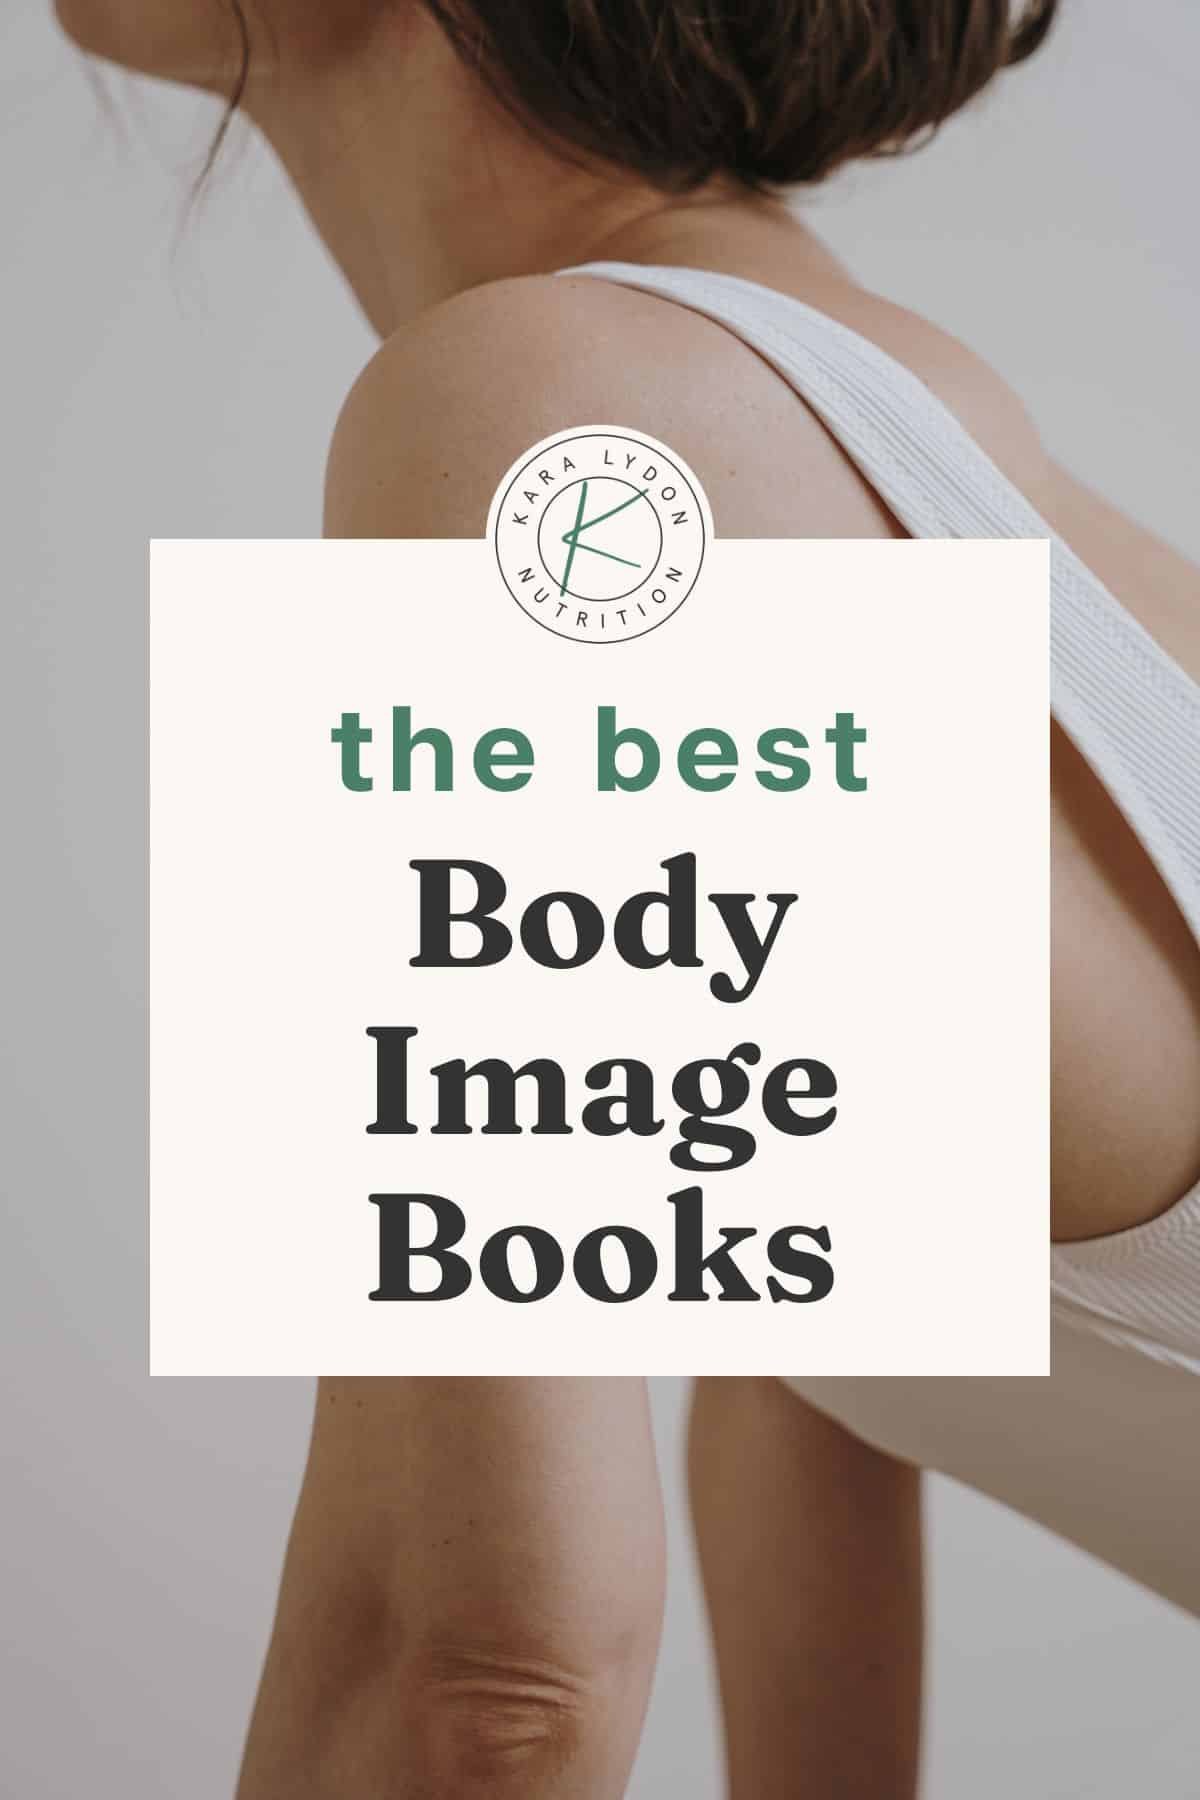 image of woman stretching with text overlay, "the best body image books."